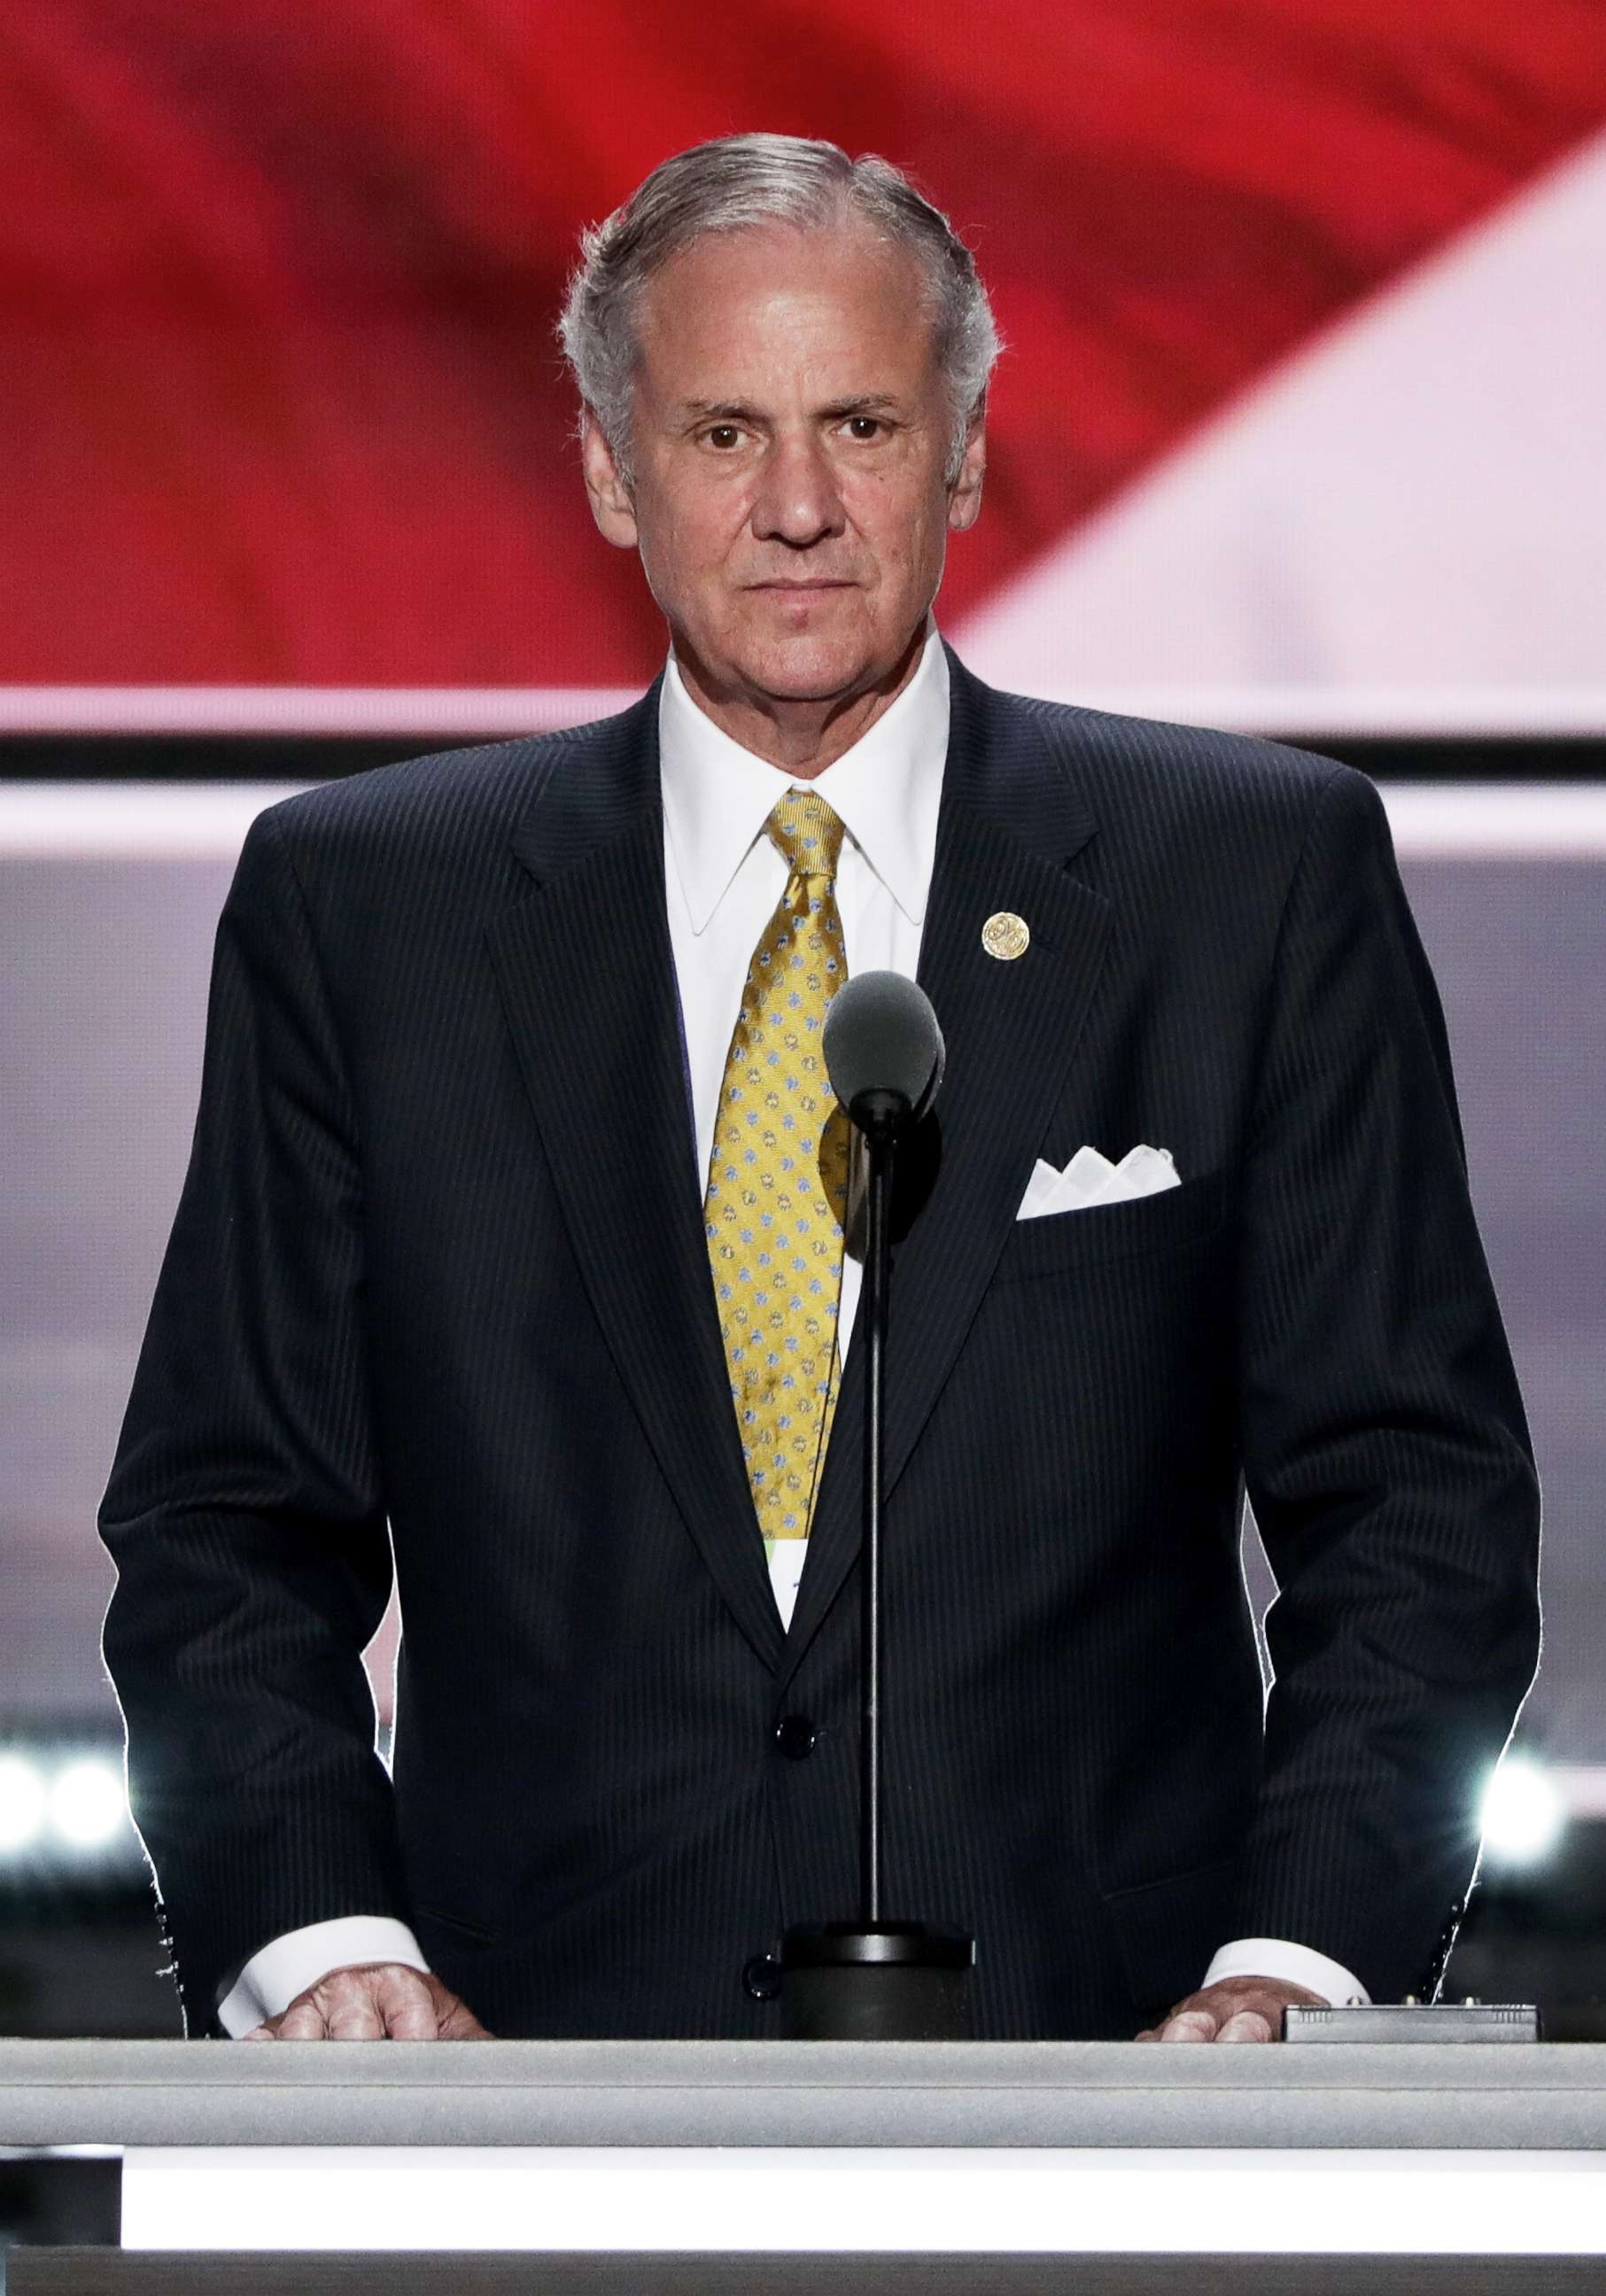 PHOTO: Lt. Gov. of South Carolina, Henry McMaster speaks at the Republican National Convention, July 19, 2016, in Cleveland, Ohio.